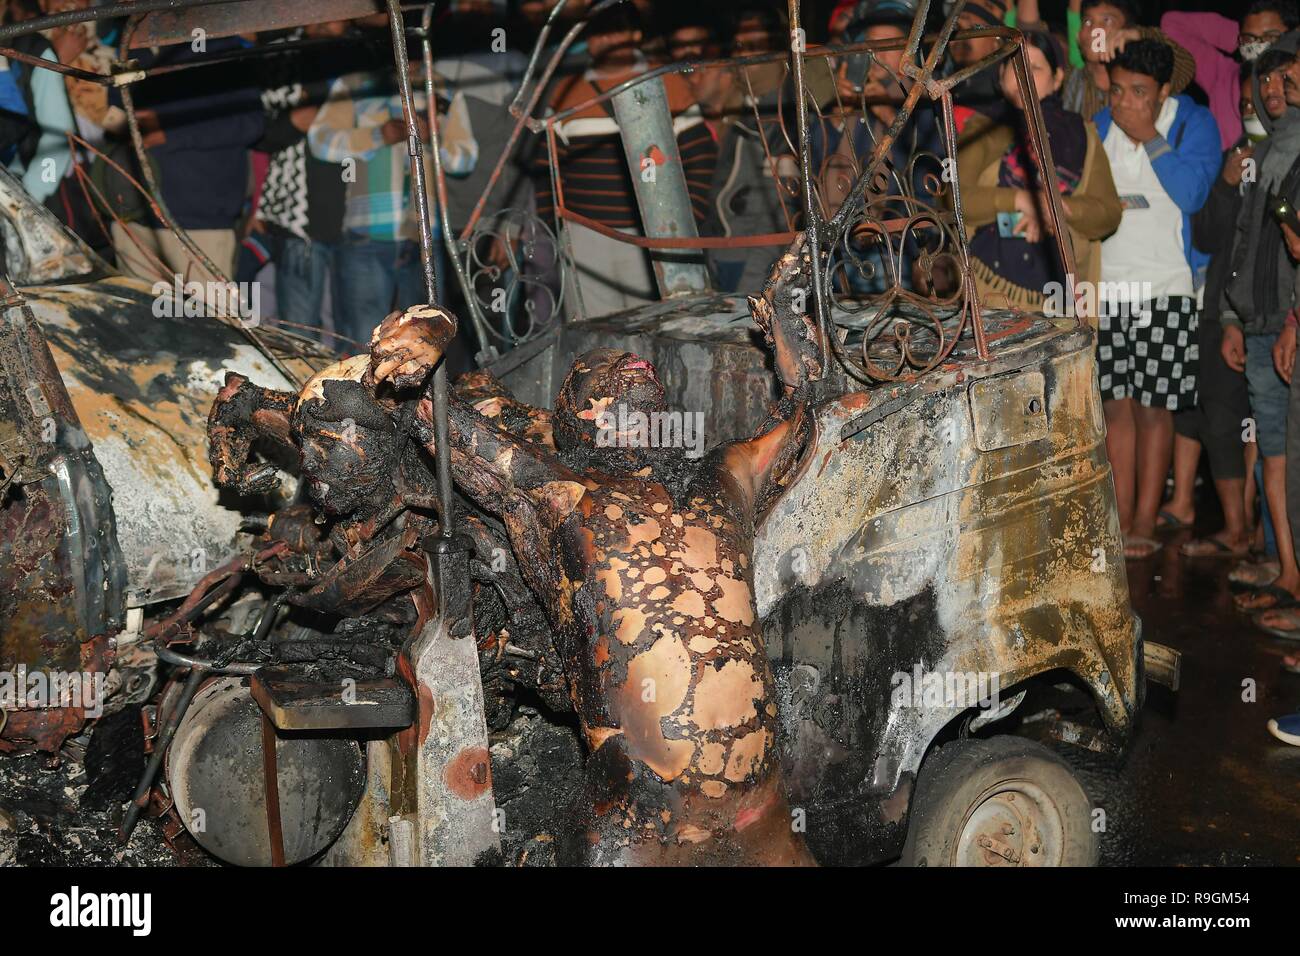 (EDITOR'S NOTE: IMAGE DEPICTS DEATH) After math of the crash seen with burnt bodies hanging out of the vehicle. Tragic road mishap at Amtali, 3 charred to death, 4 injured when two vehicles crushed face on resulting into a fire. Stock Photo